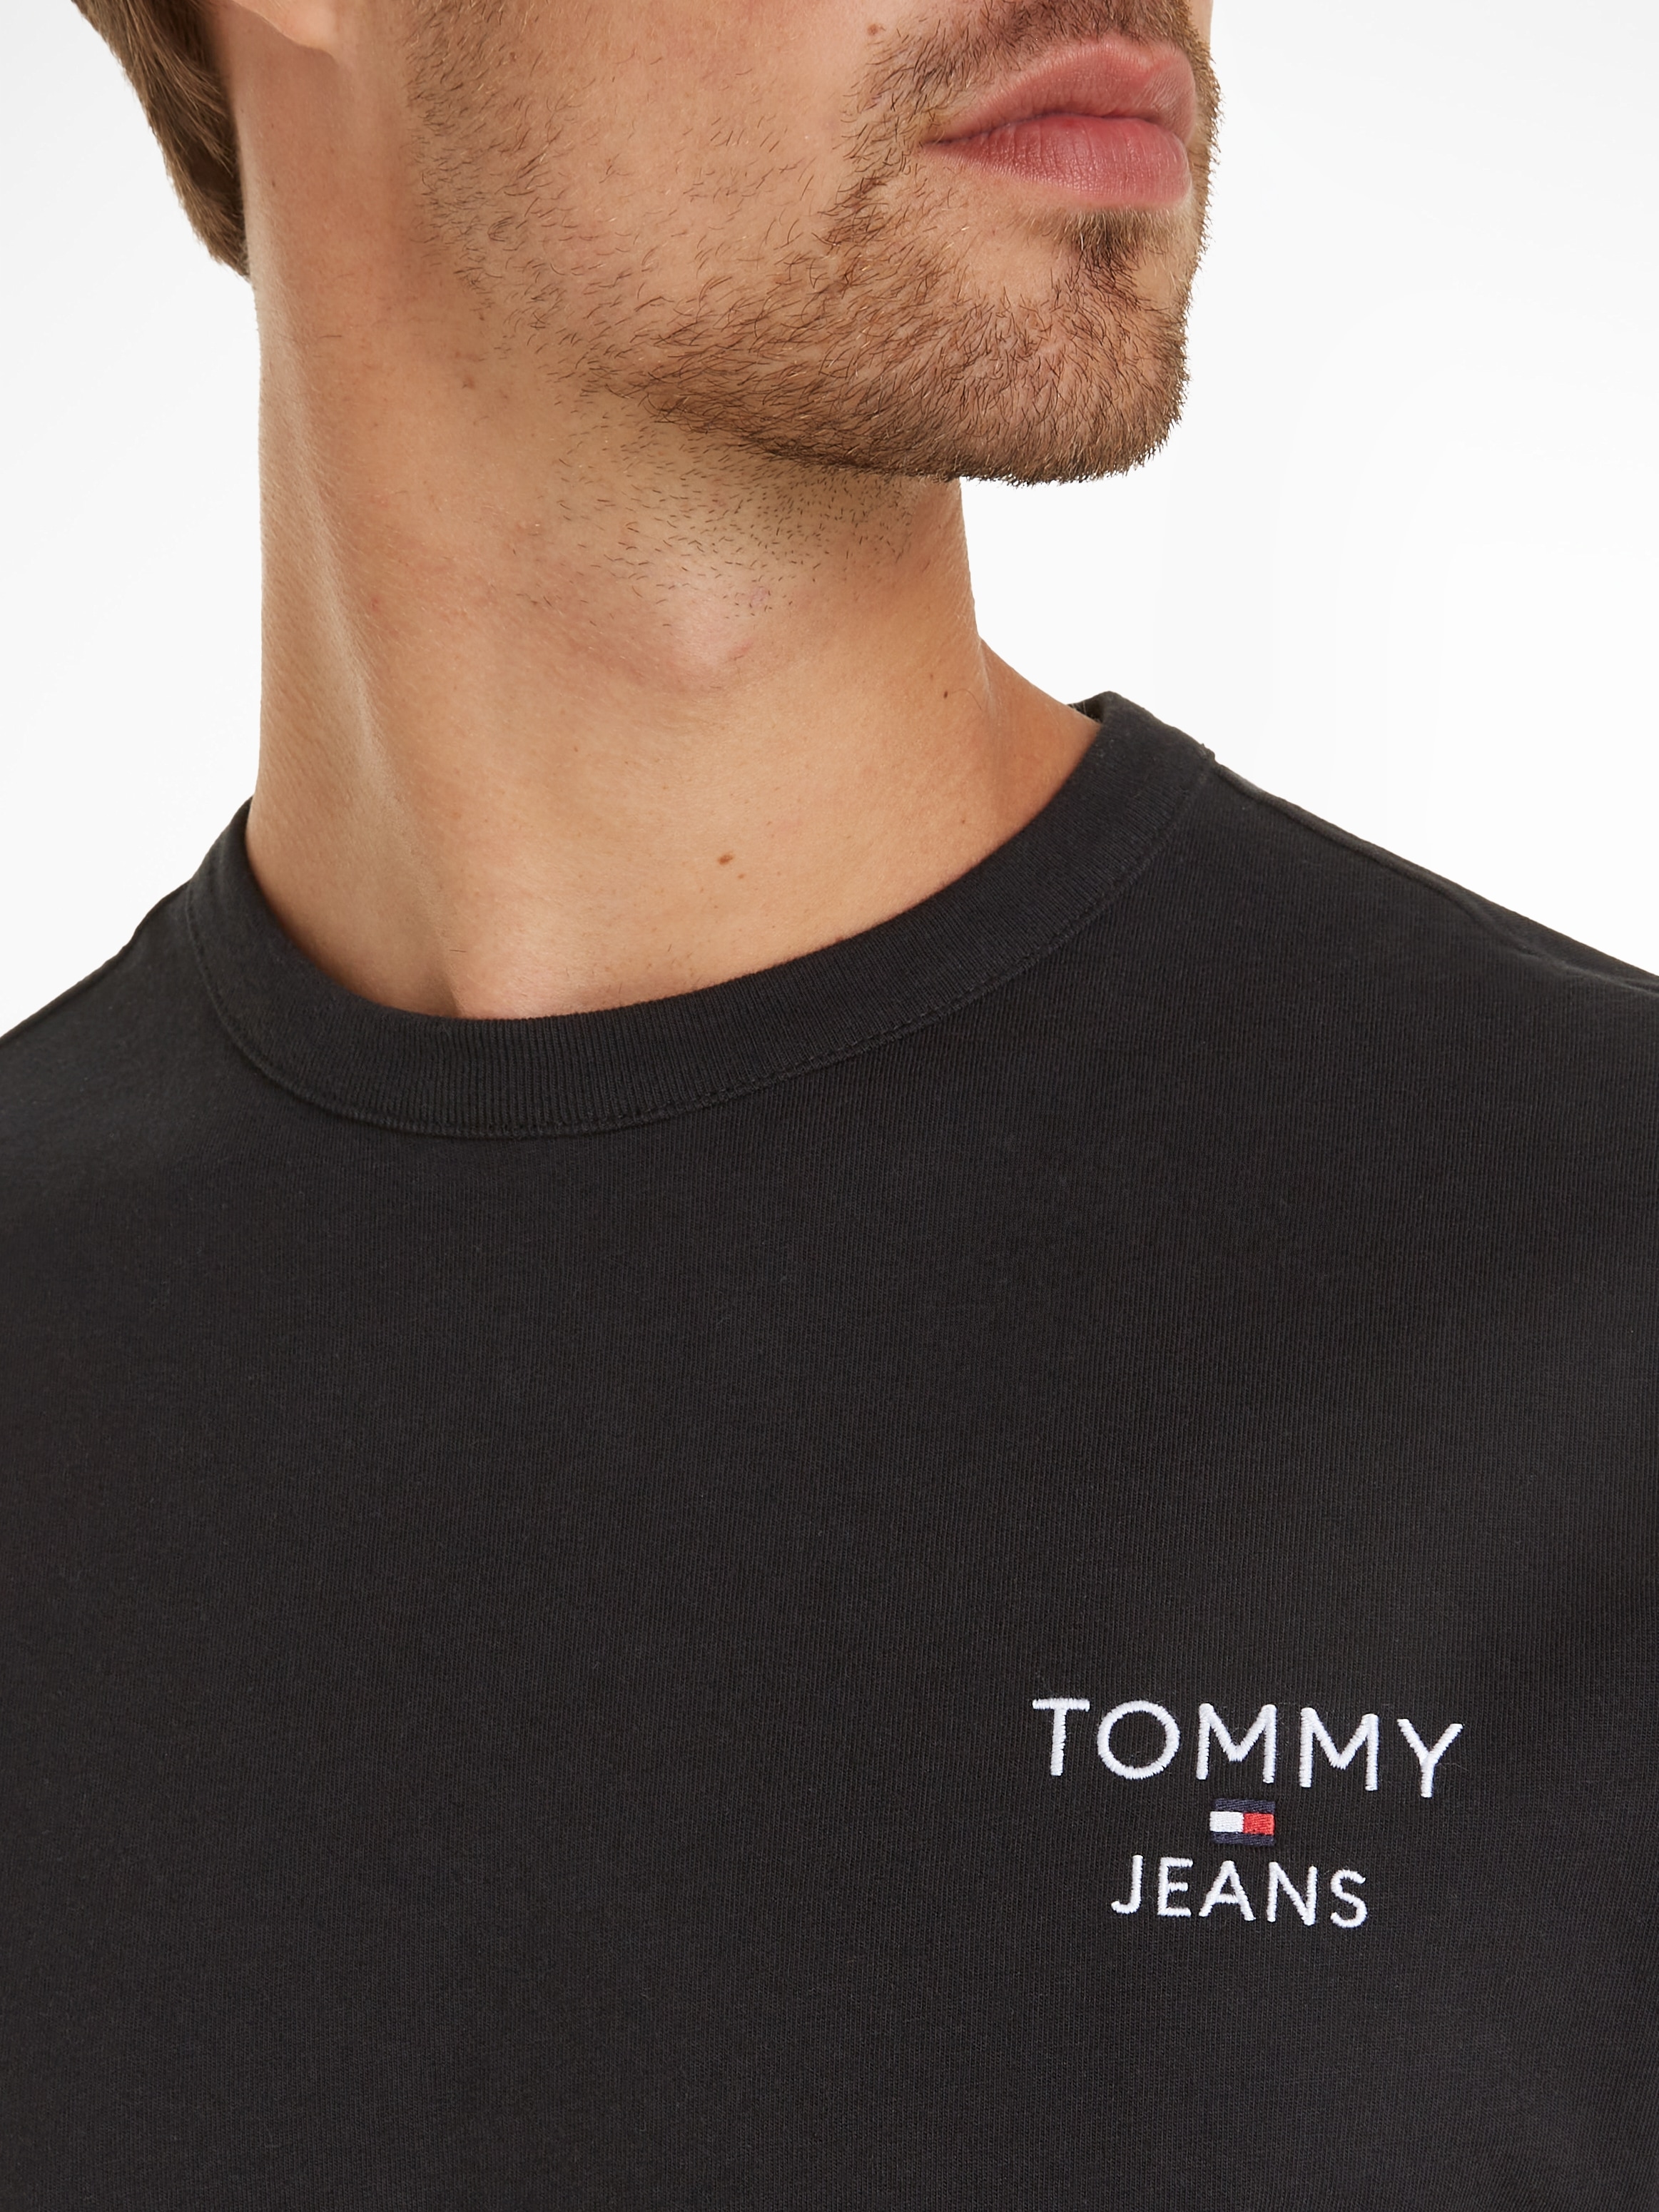 REG CORP Tommy »TJM Jeans T-Shirt Jeans TEE Stickerei online bei EXT«, mit Tommy